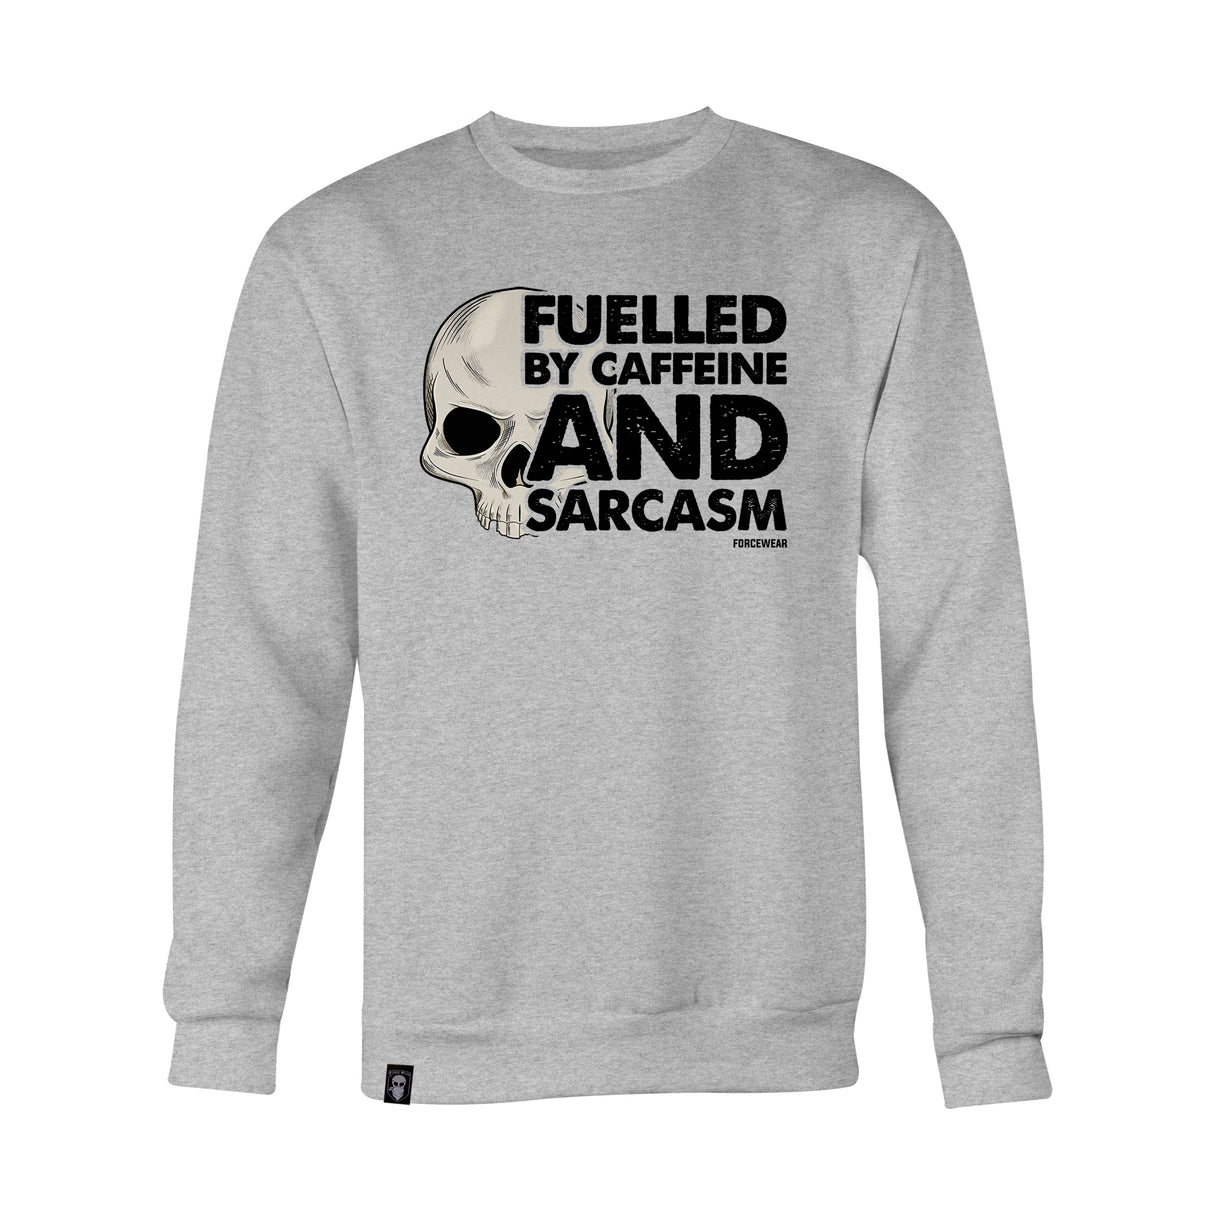 FUELLED BY CAFFEINE AND SARCASM PT SWEAT - Force Wear HQ